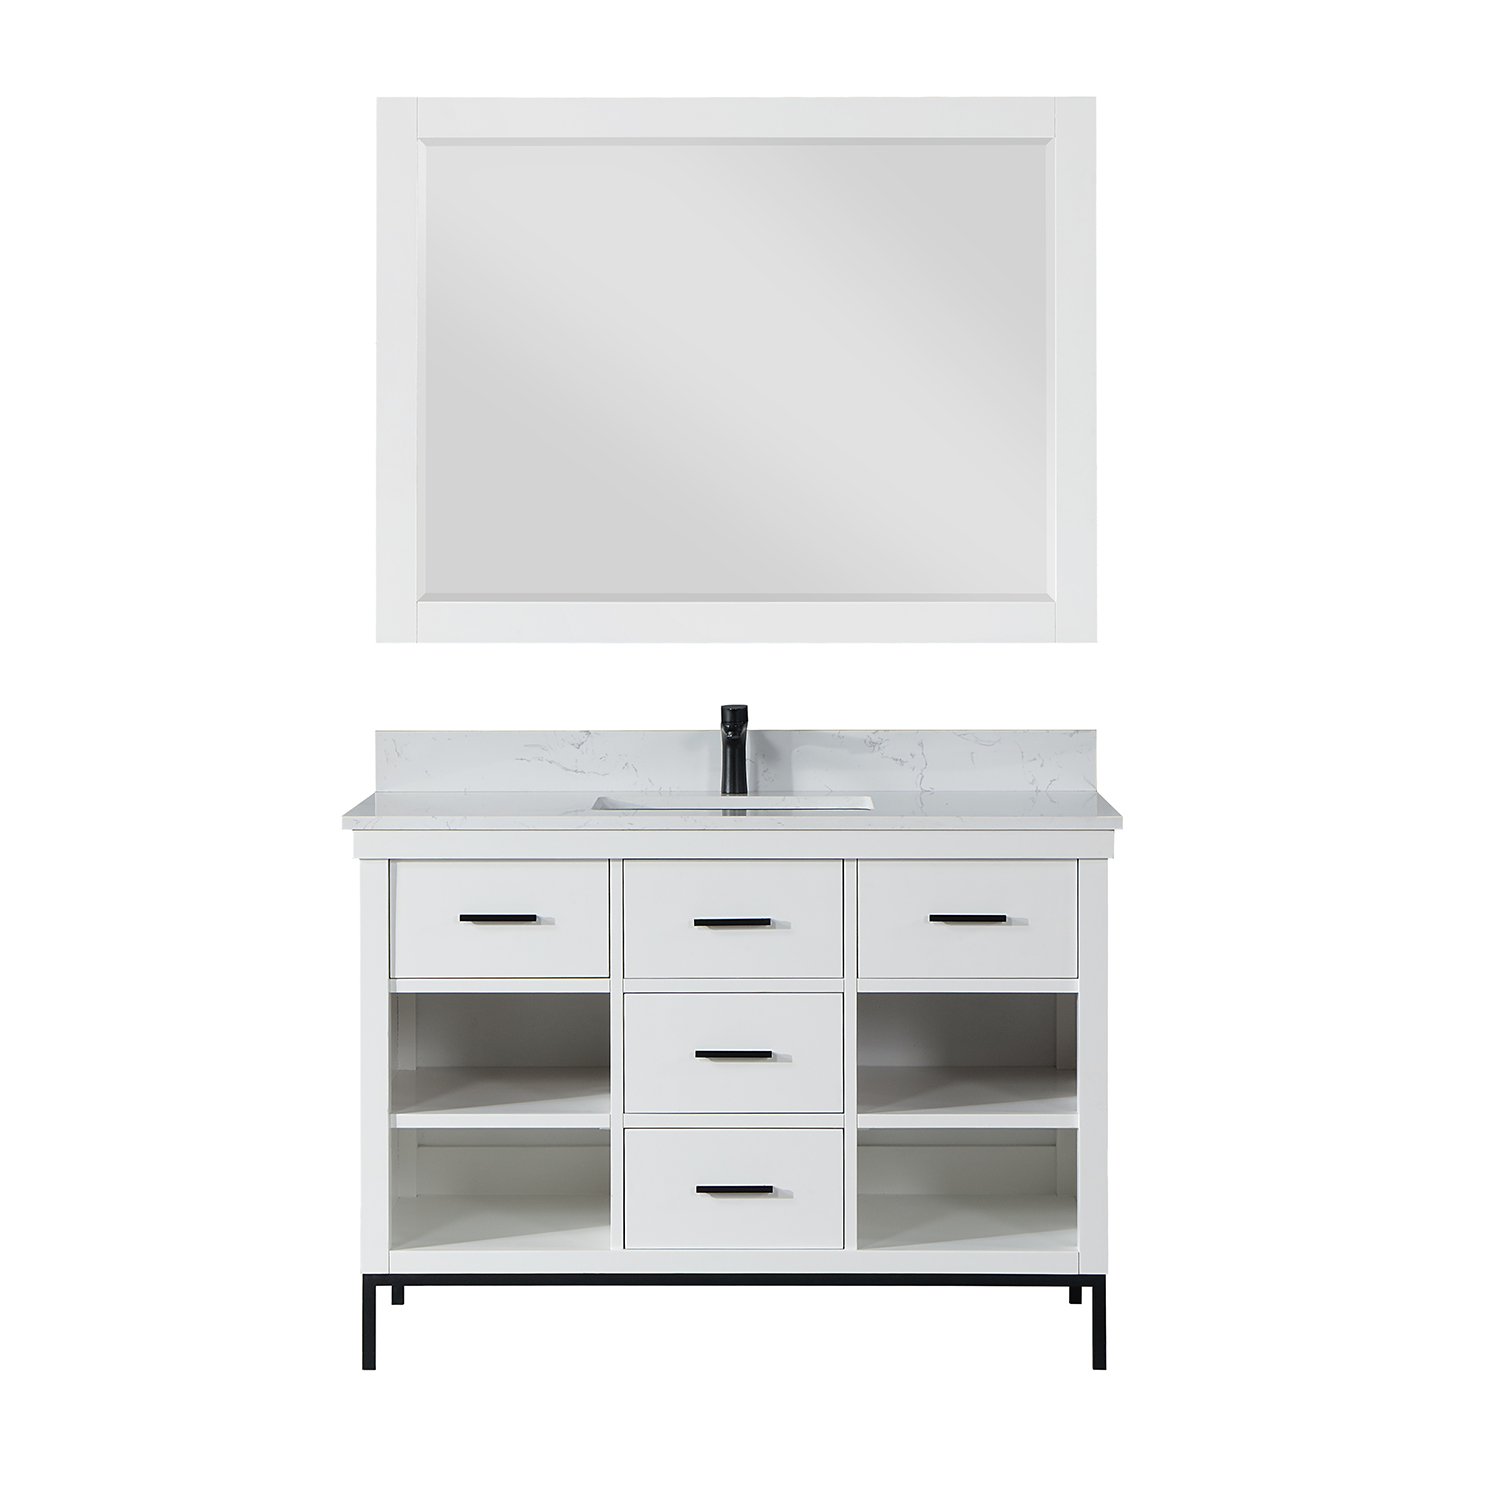 Issac Edwards Collection 48" Single Bathroom Vanity Set in White with Carrara White Composite Stone Countertop without Mirror